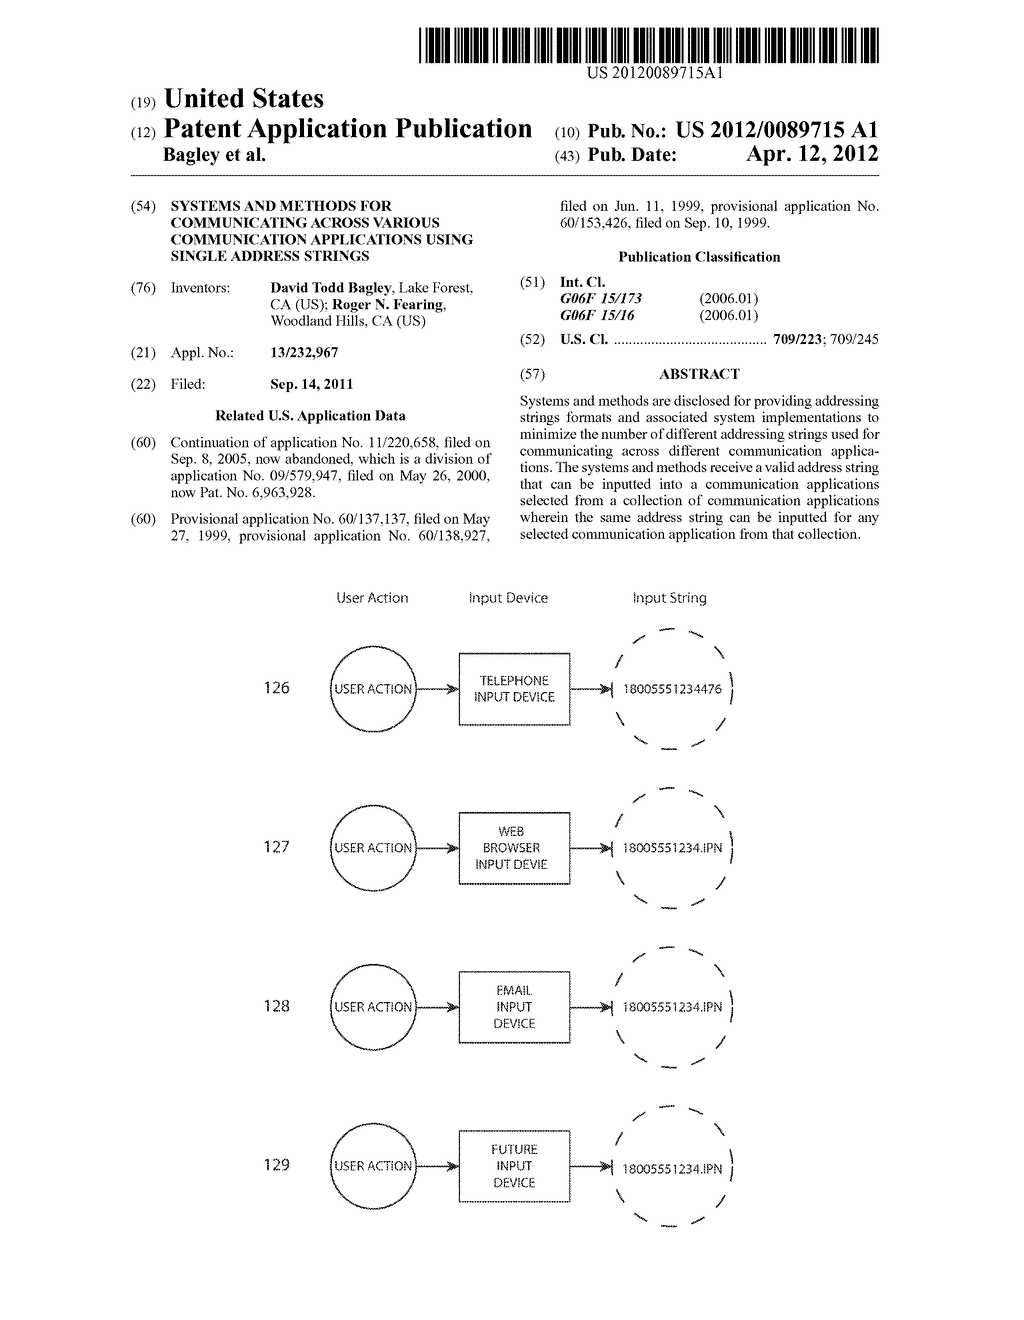 Systems and methods for communicating across various communication     applications using single address strings - diagram, schematic, and image 01